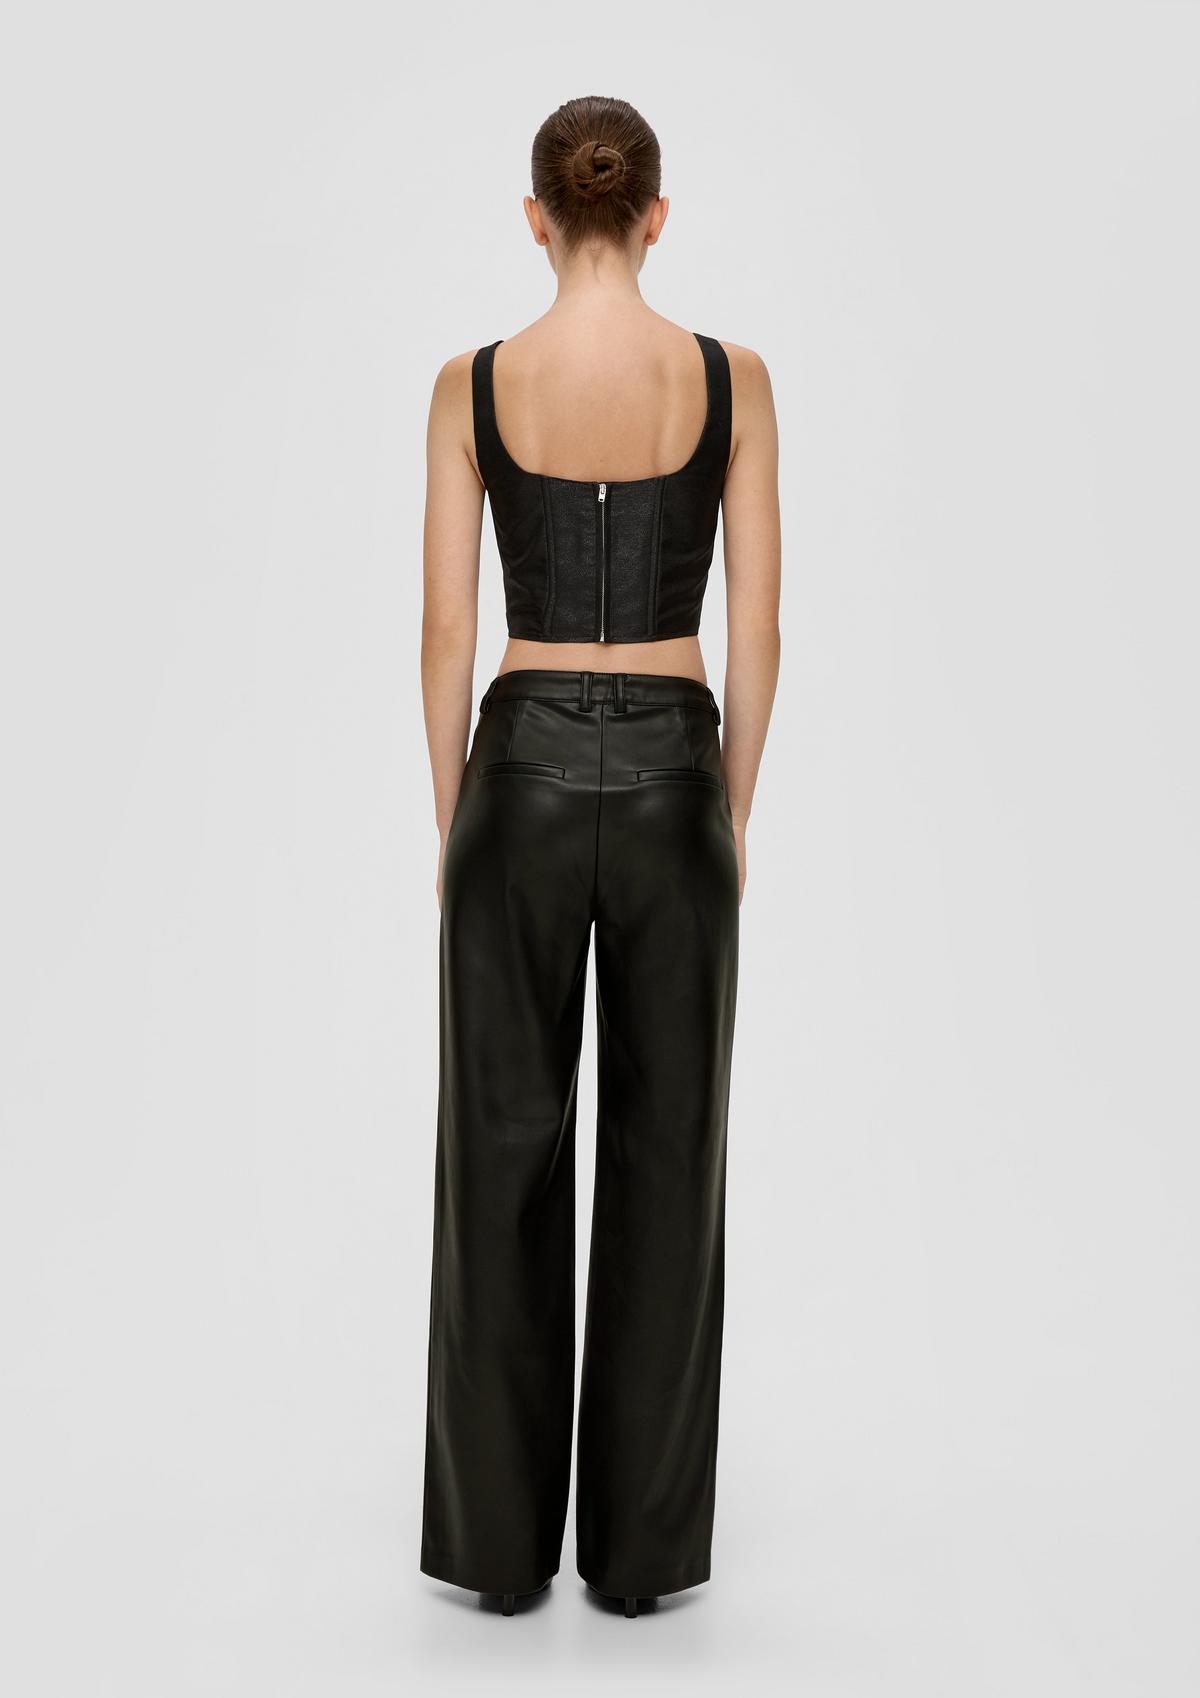 s.Oliver Regular fit: Faux leather trousers | QS x ELIF